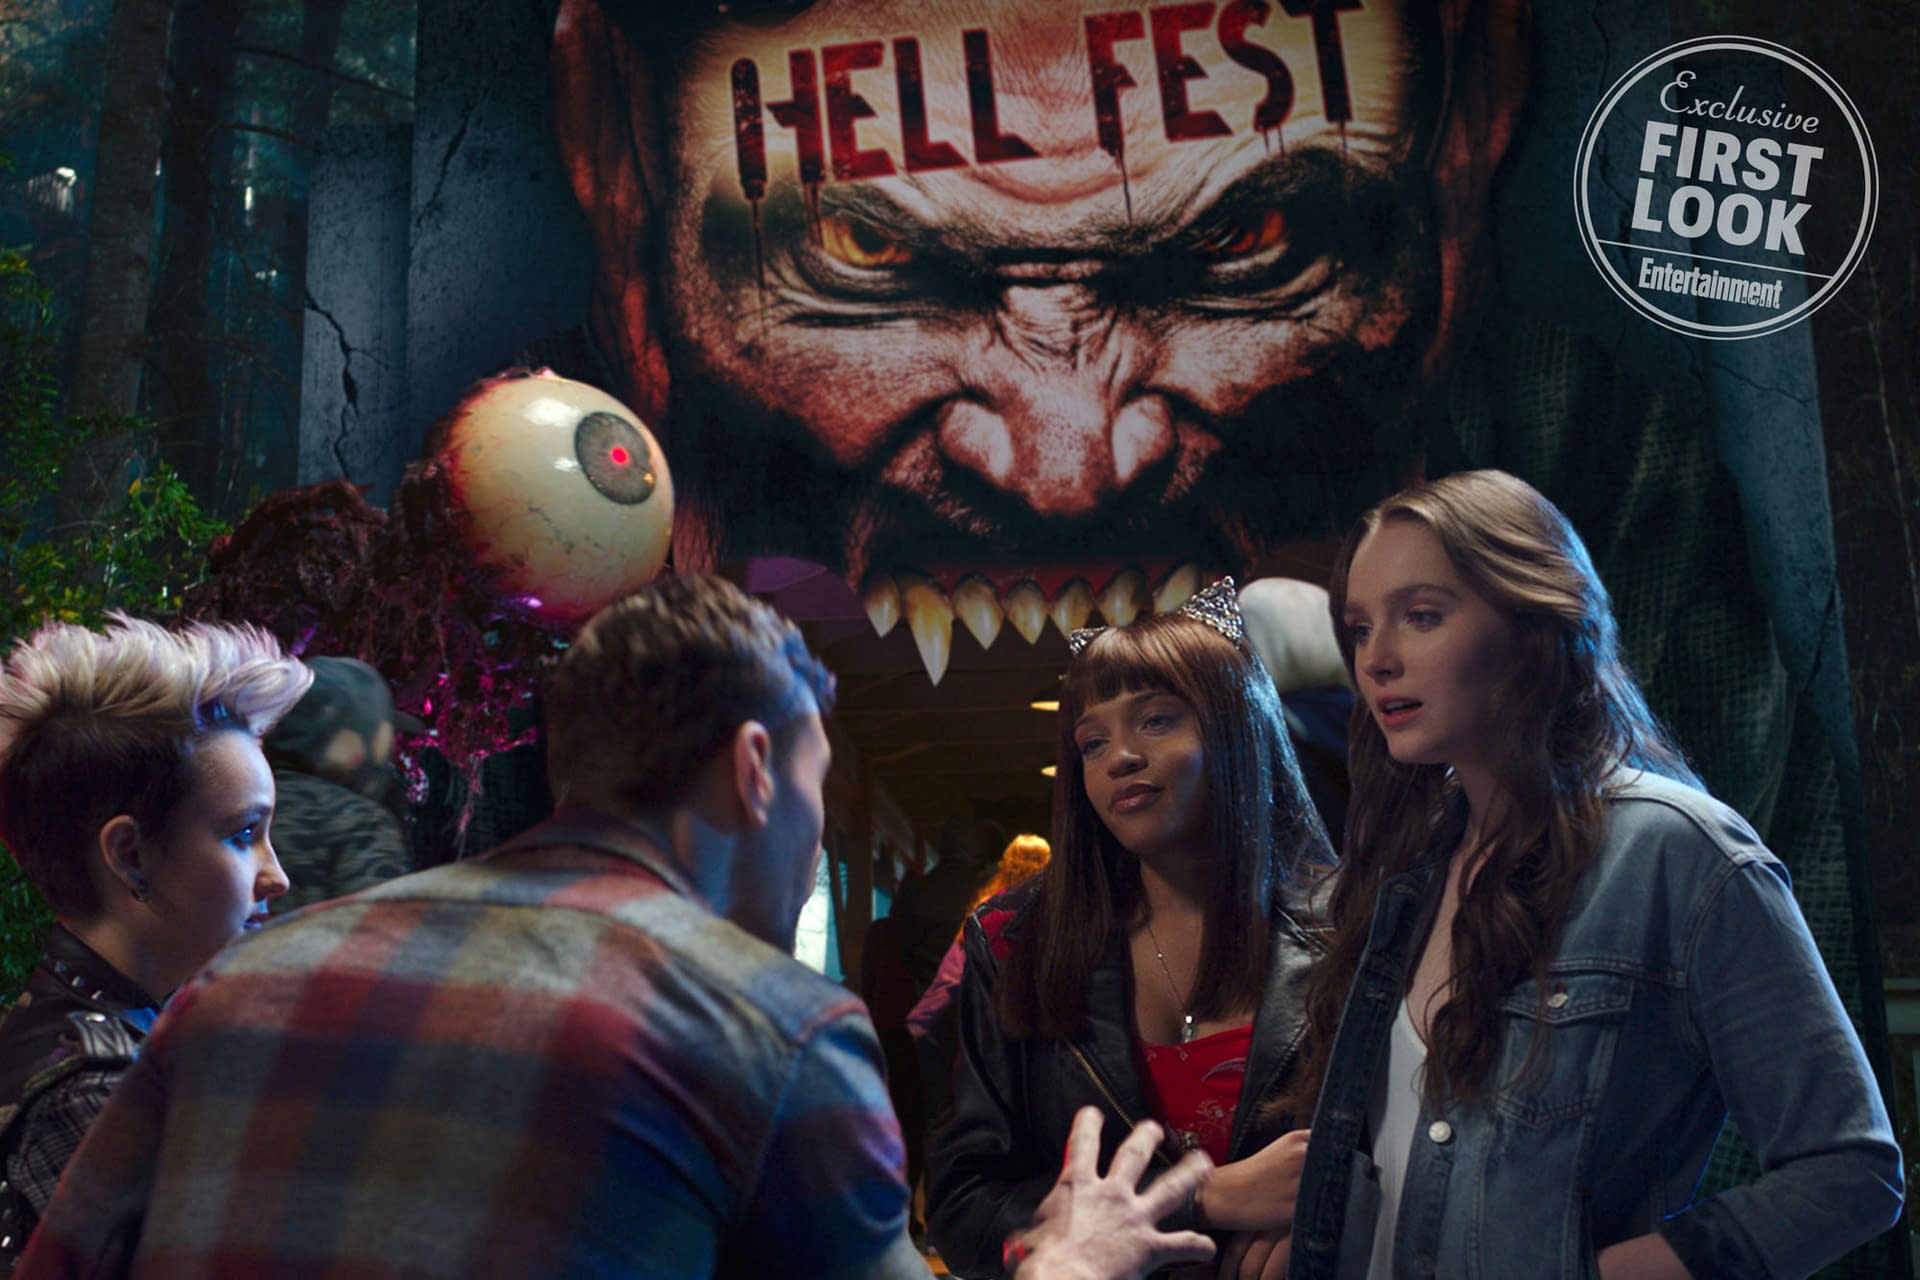 First Look at the New Horror Movie Hell Fest Plus a Poster